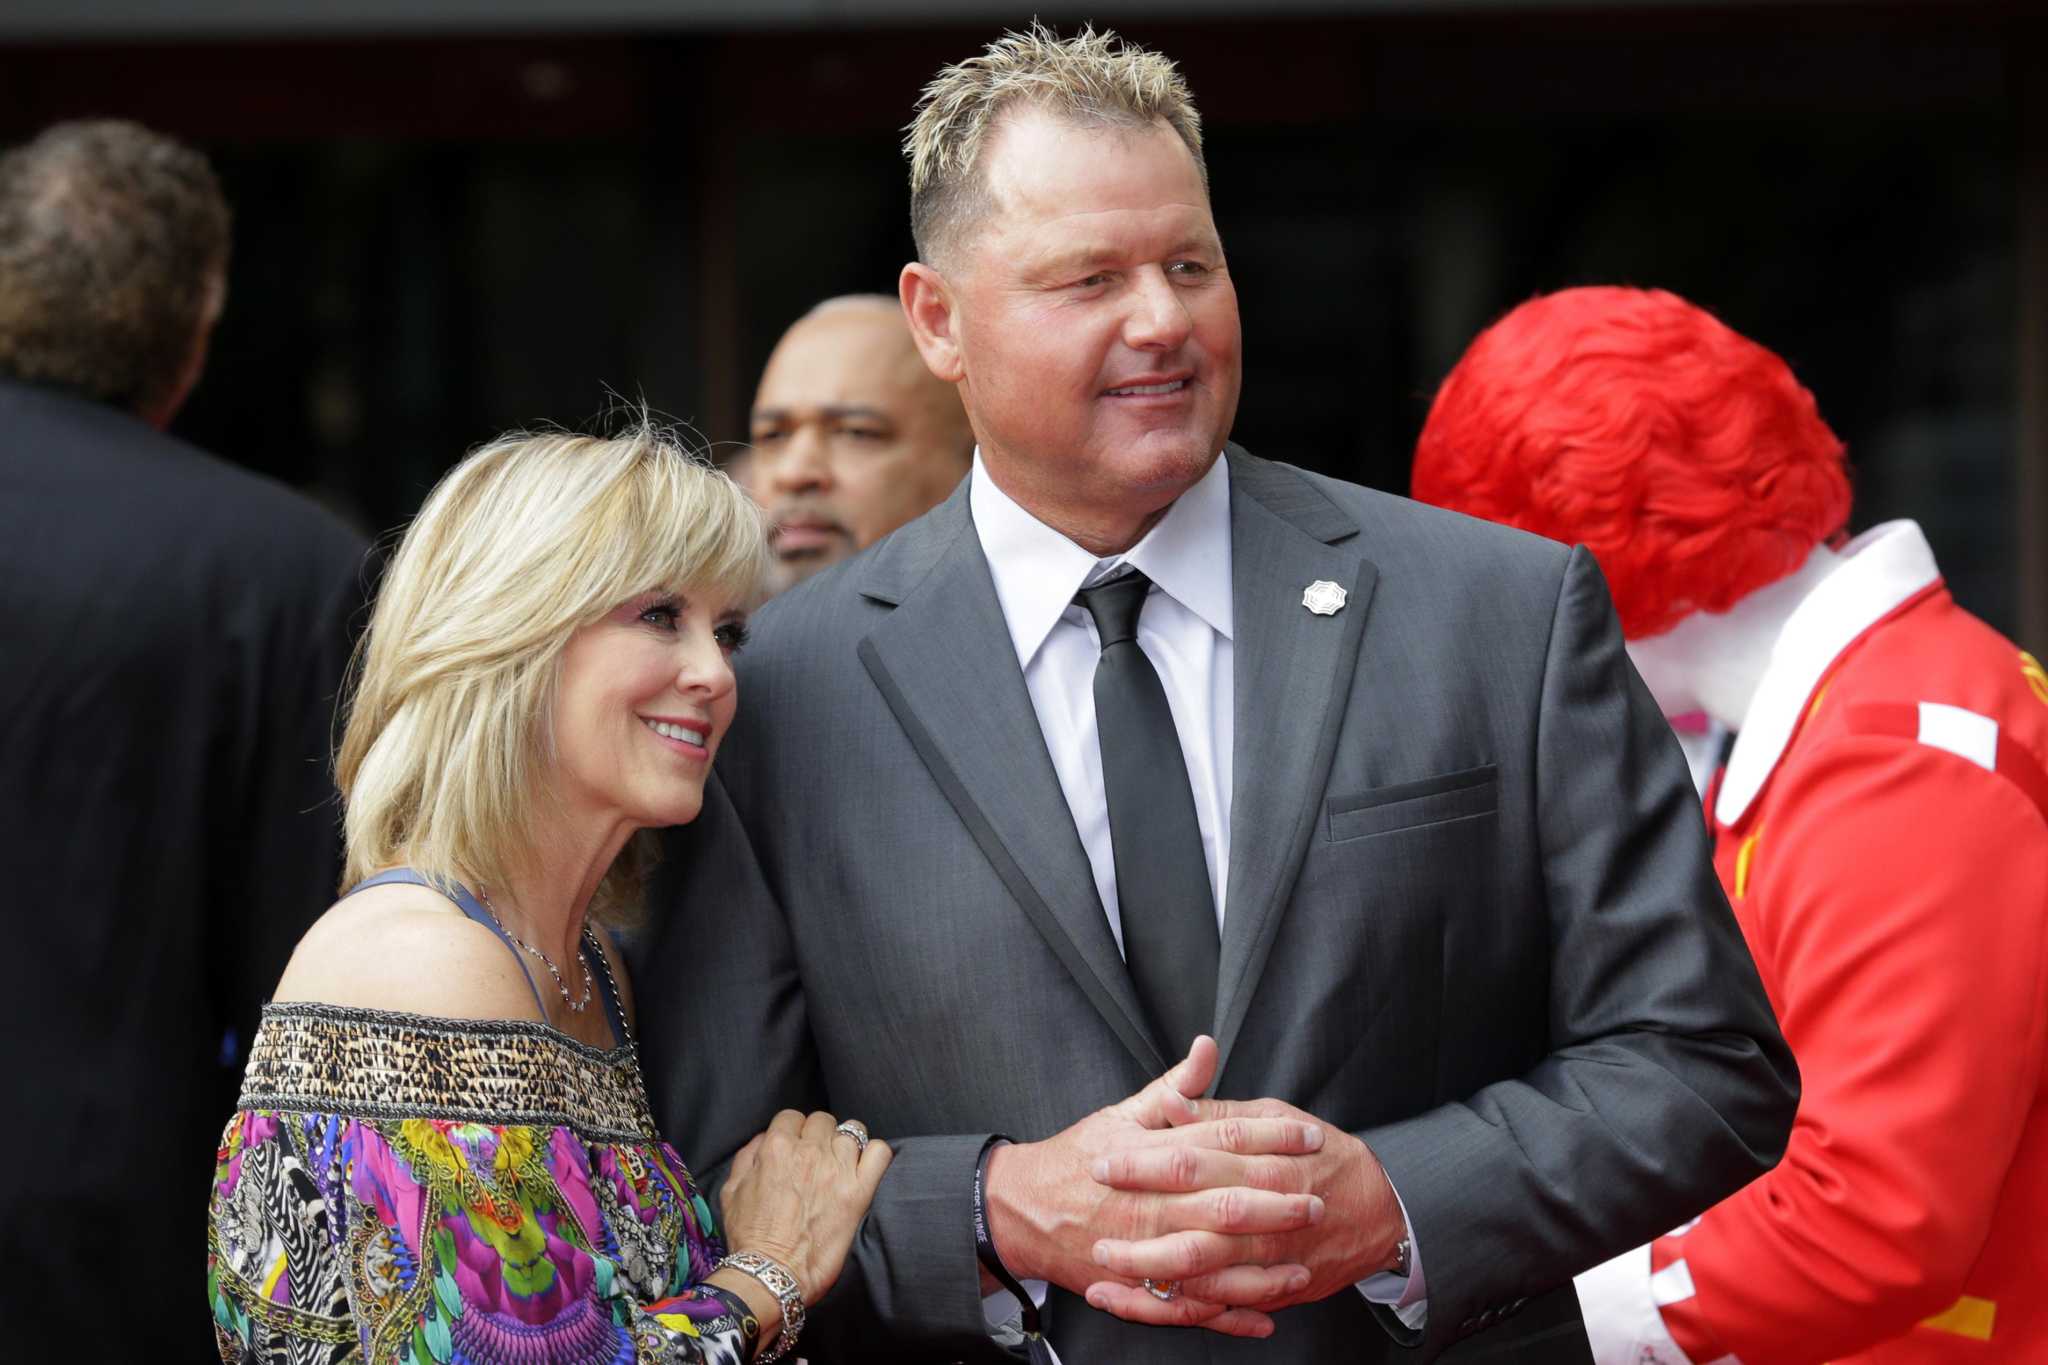 Roger Clemens' youngest son is now one of the top sluggers in